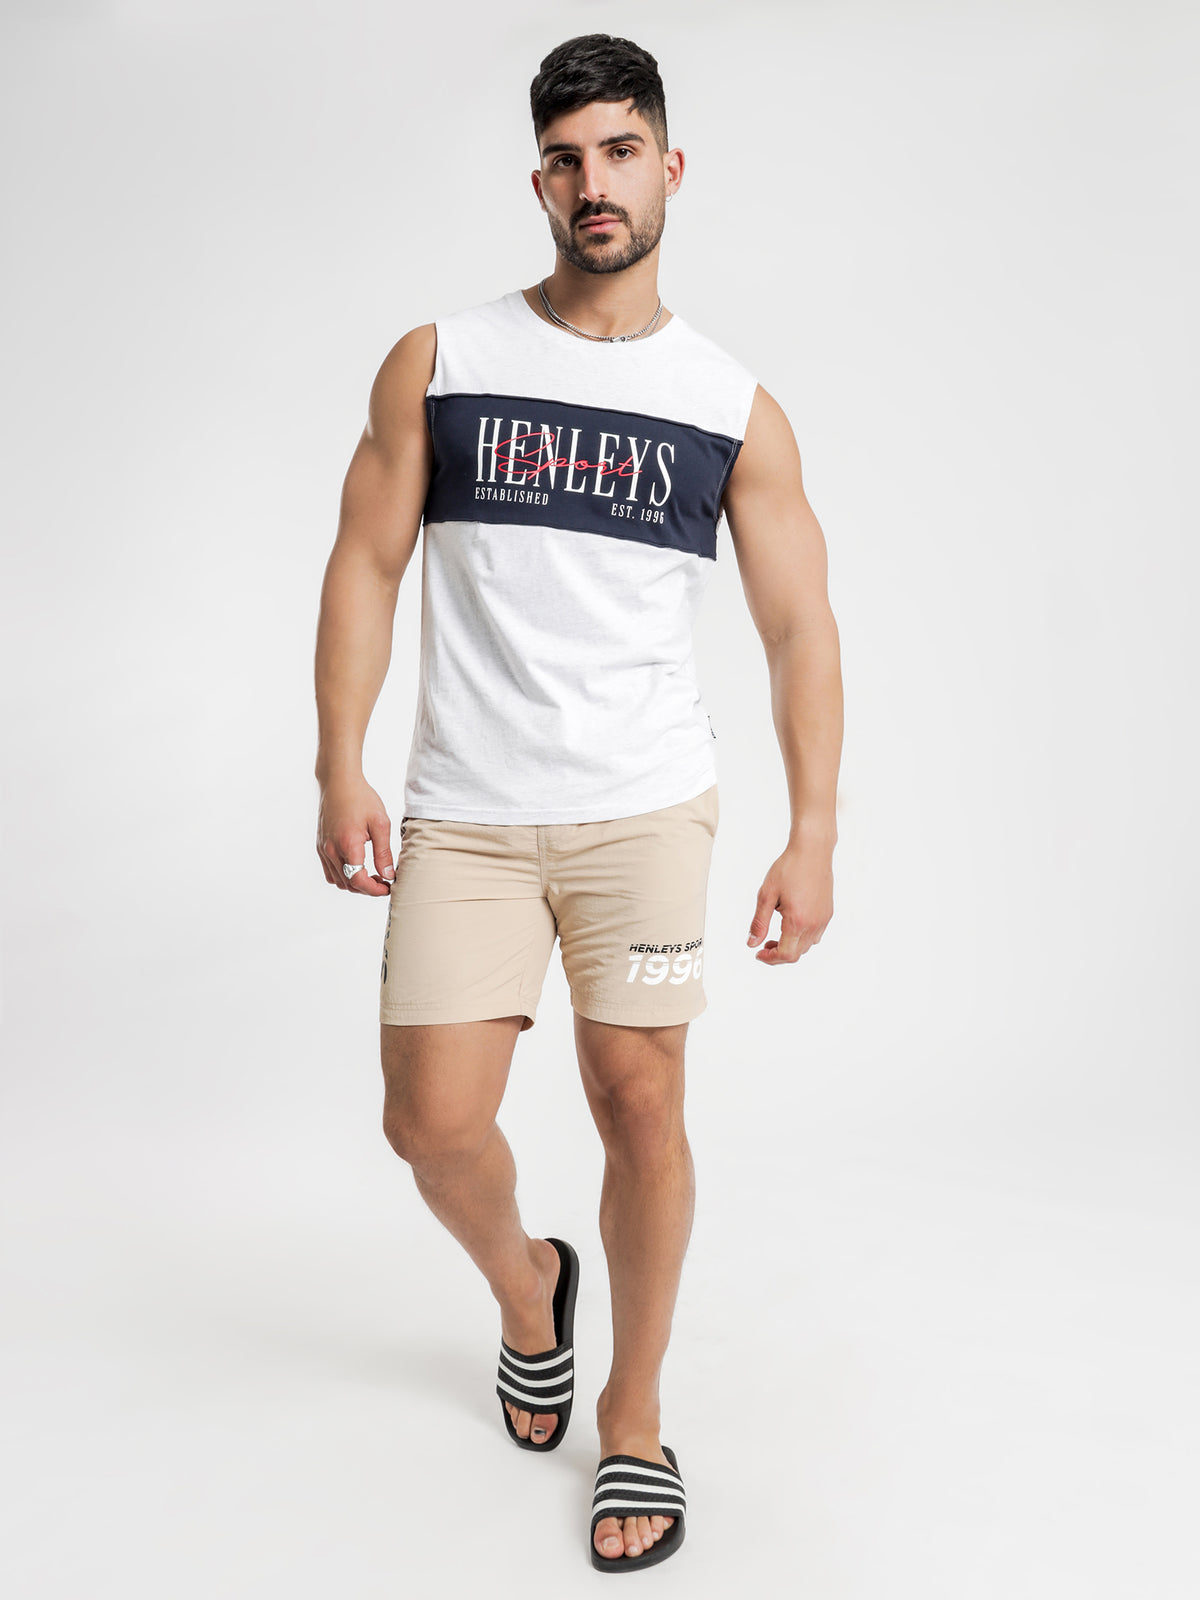 College Muscle Tee in Snow Marle